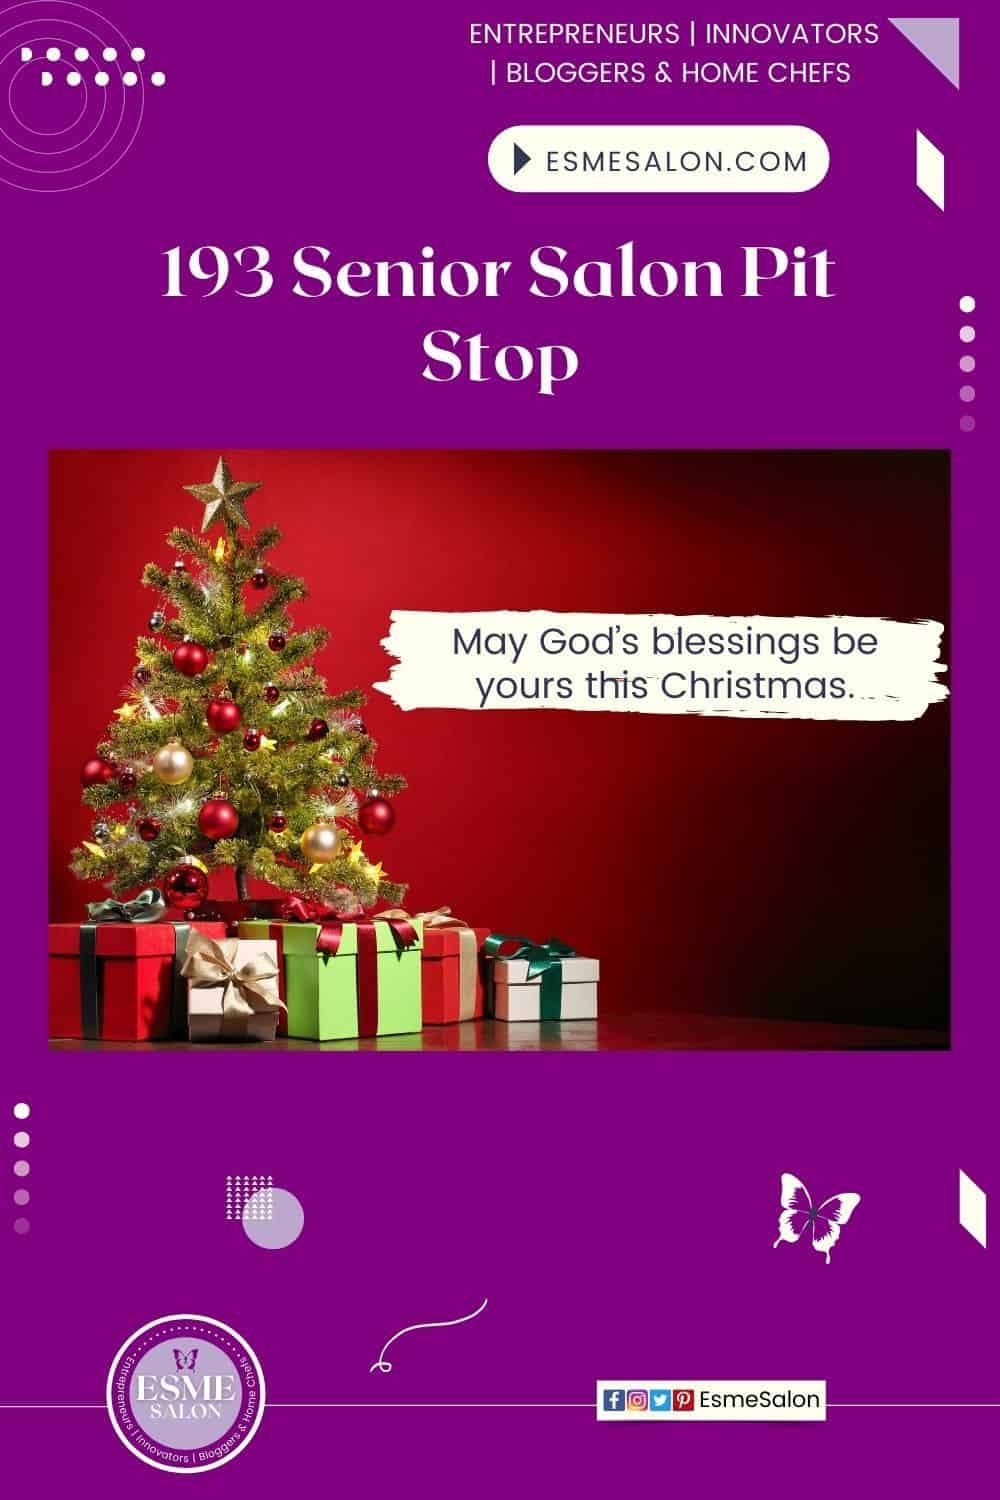 Purple background with a red block, green Christmas tree and red, white and green gift boxes with wording: May God’s blessings be yours this Christmas.